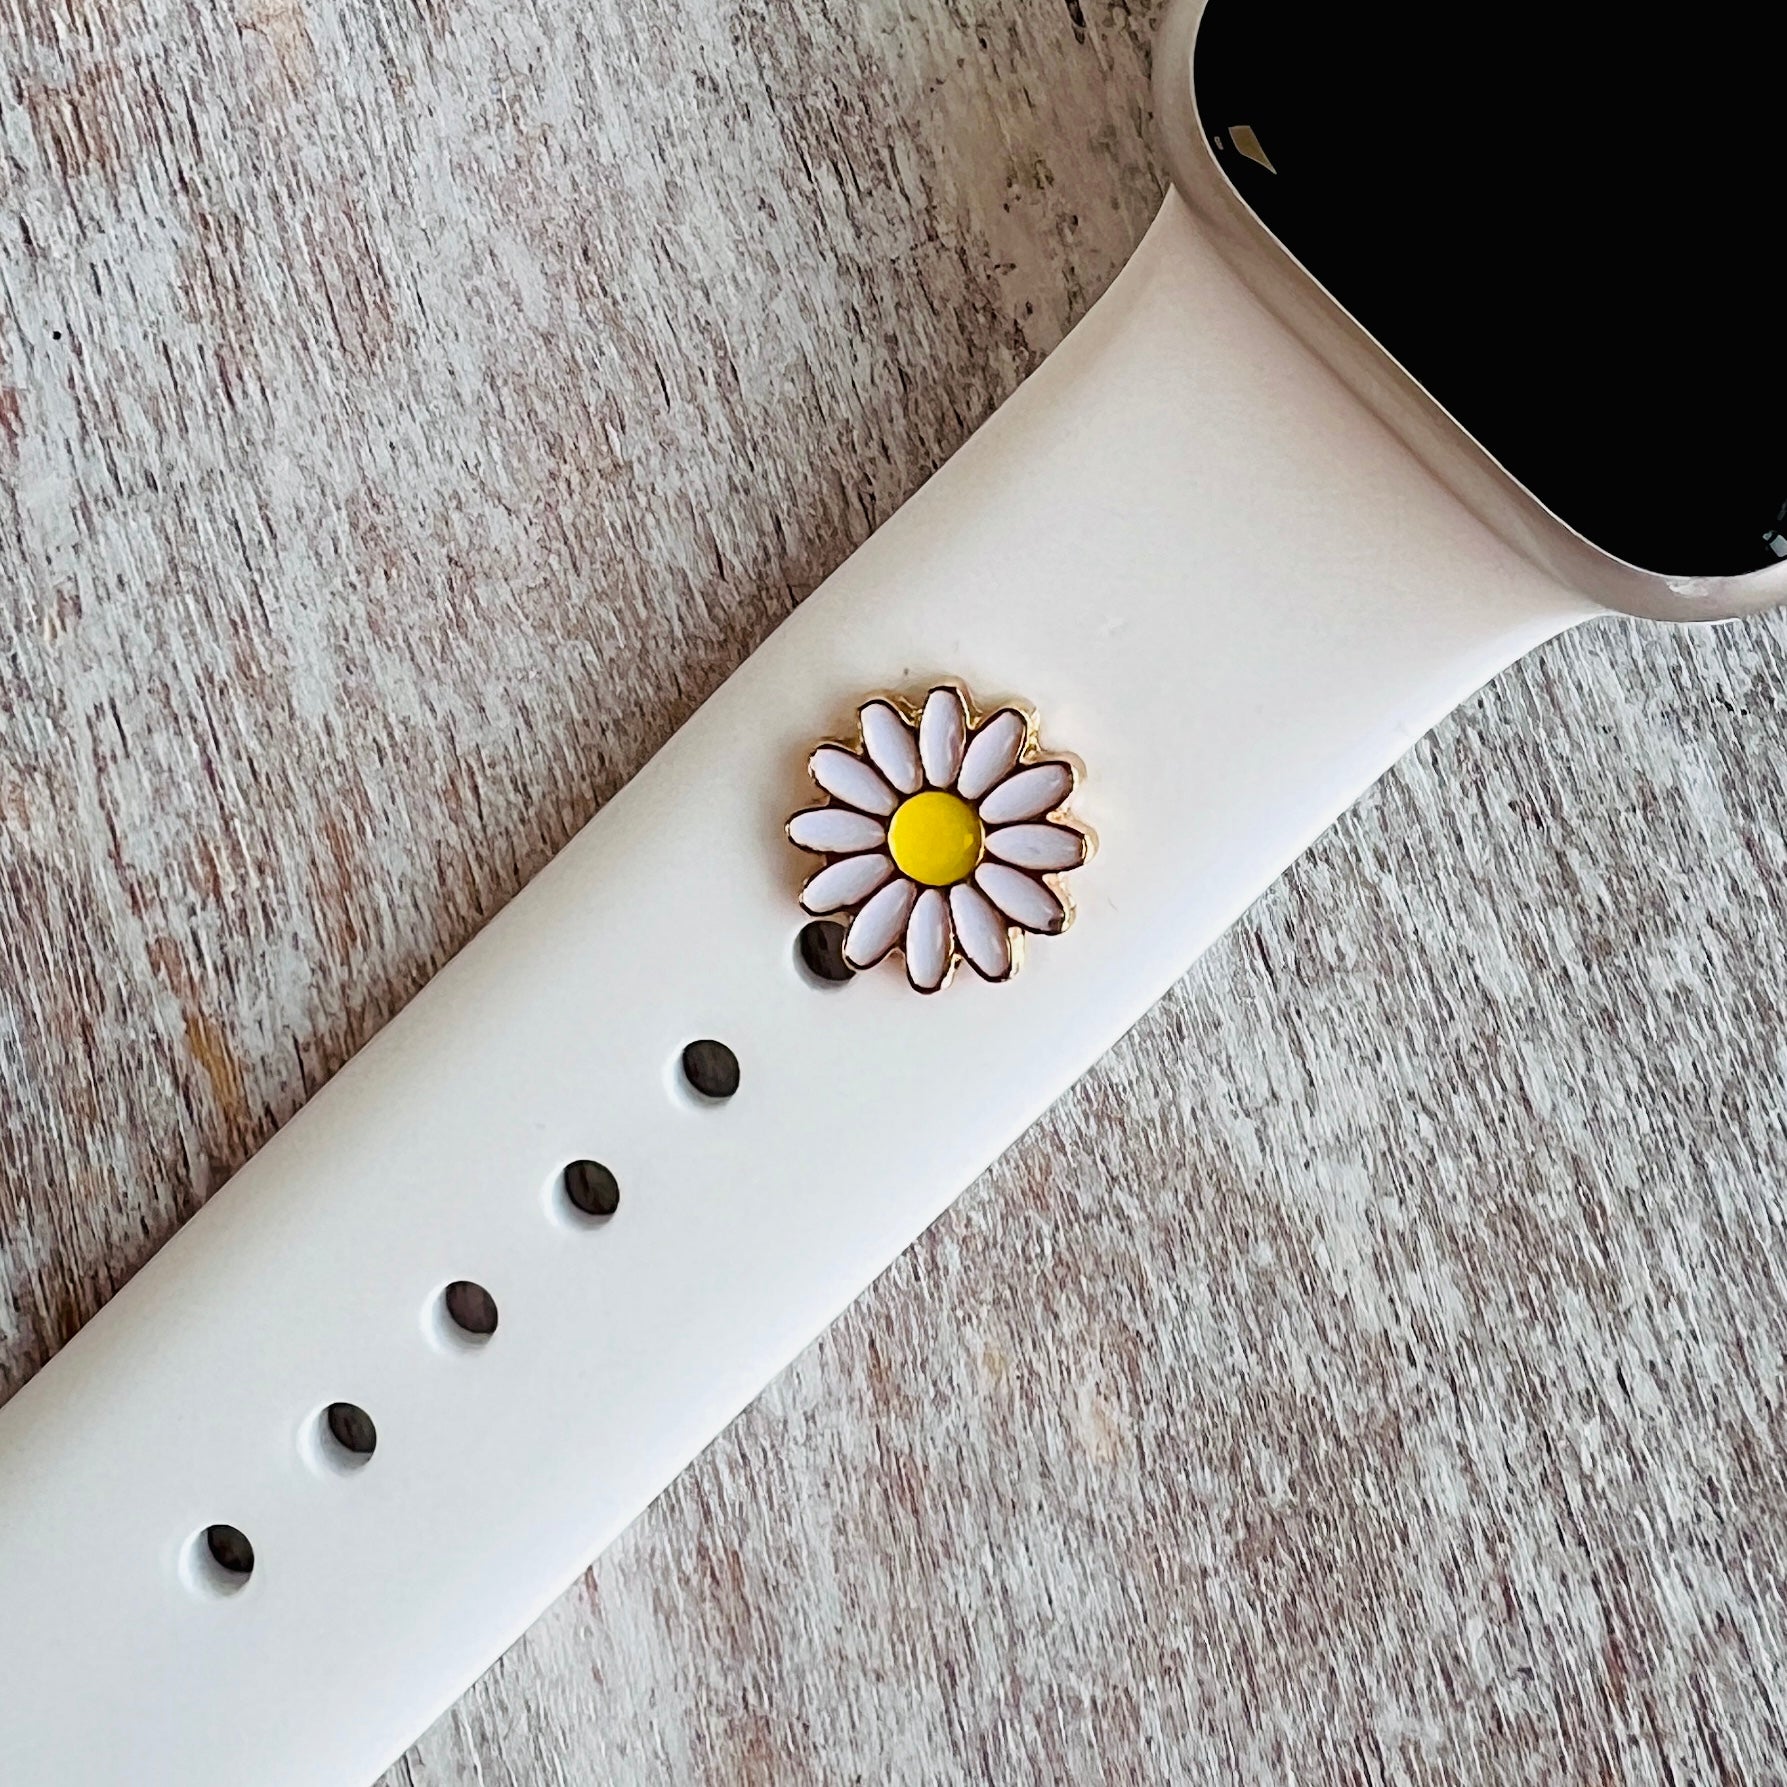 Band Charms 1pc. Bloomin' Daisy Multiple Colors Available